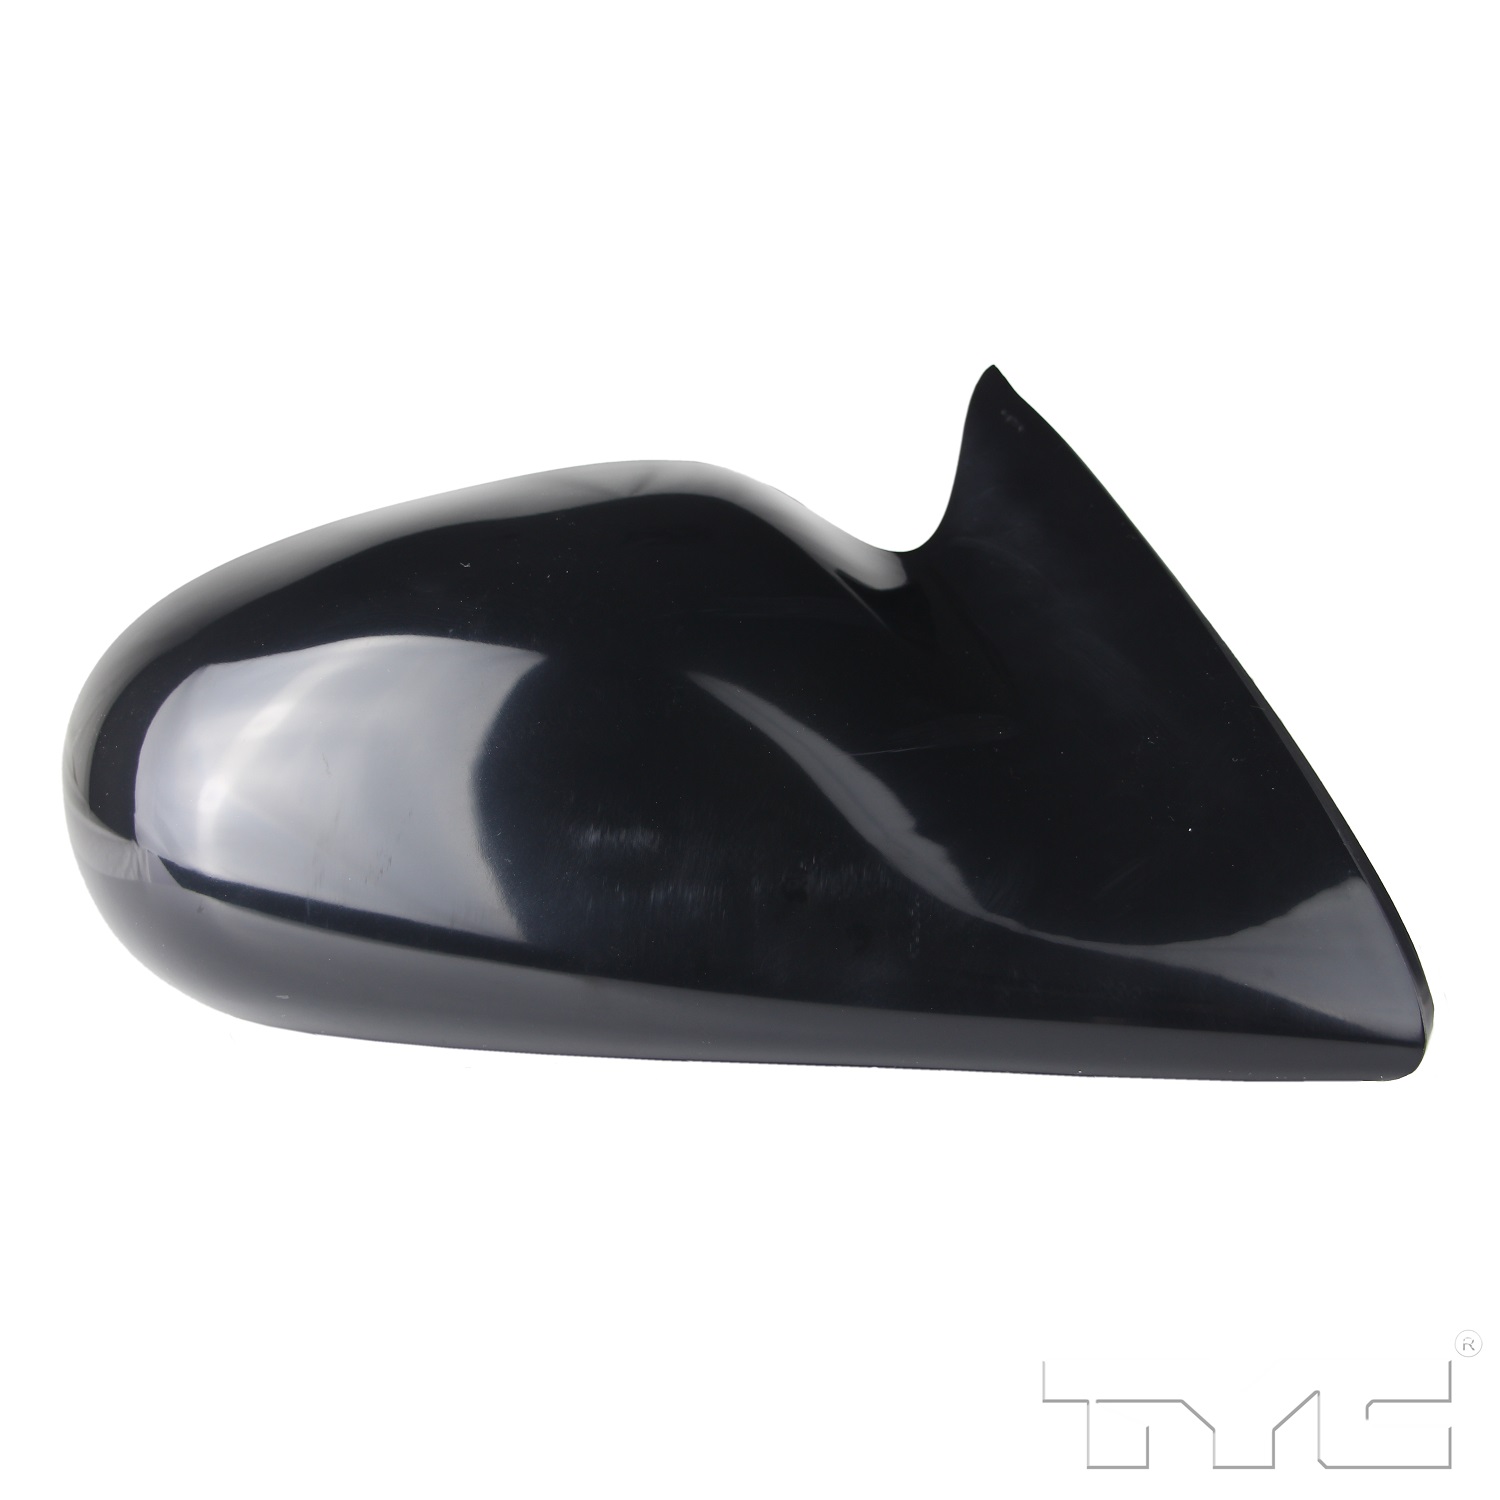 Aftermarket MIRRORS for NISSAN - ALTIMA, ALTIMA,00-01,RT Mirror outside rear view